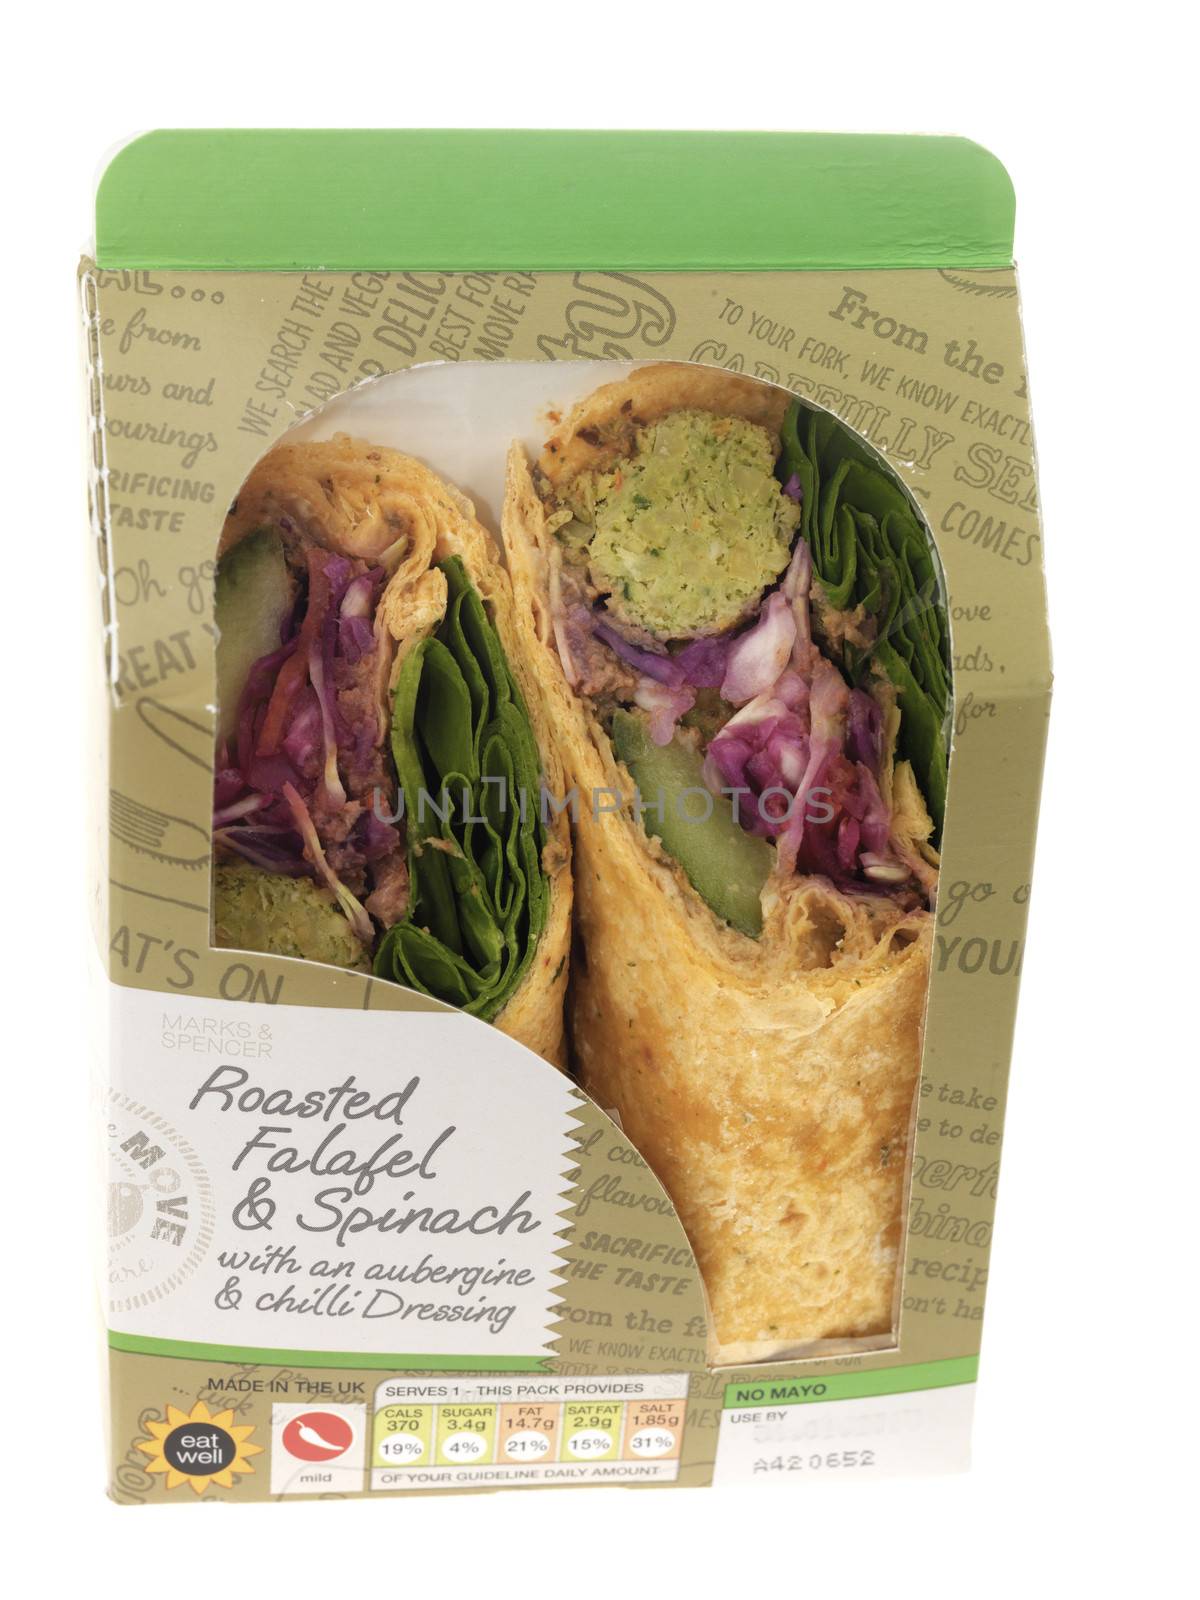 Falafel and Spinach Wraps by Whiteboxmedia